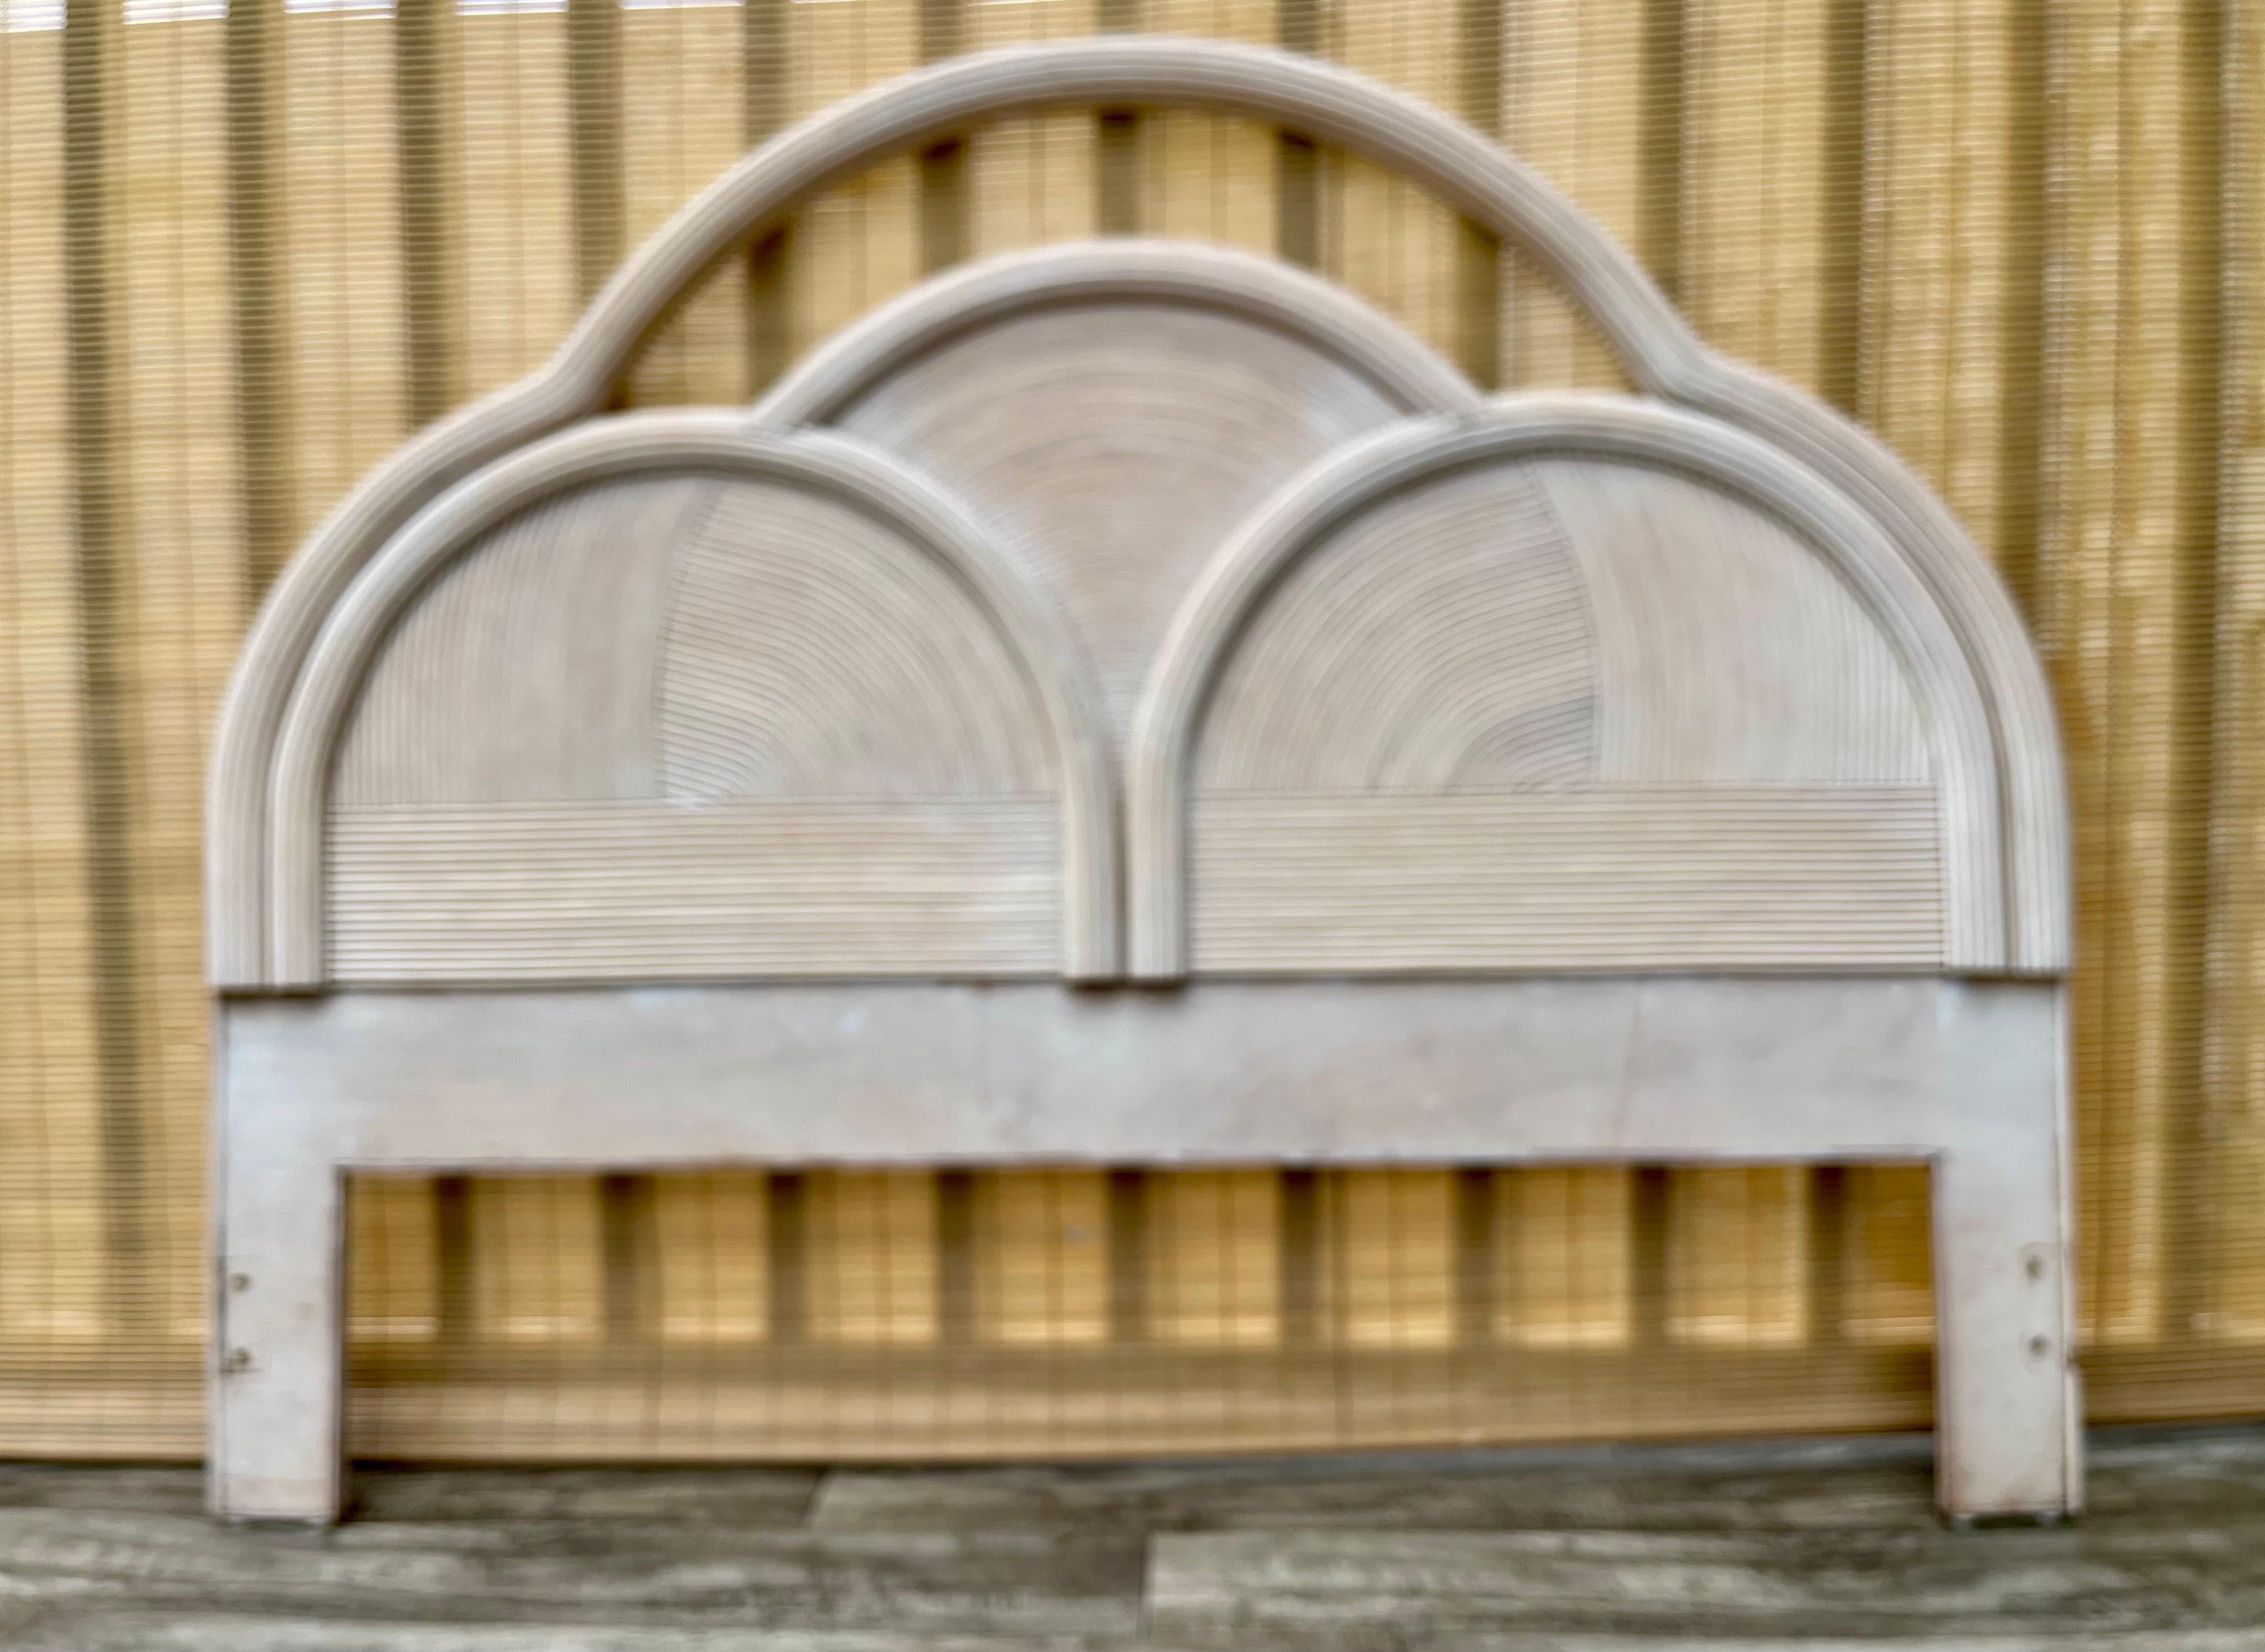 Vintage Boho Pencil Reed Queen Size Headboard in the Gabriella Crespi Style. Circa 1980s
Features a chic pencil reed swirl pattern design, an arched top, and a beautiful cream color. 
In an excellent original condition with very minor signs of wear